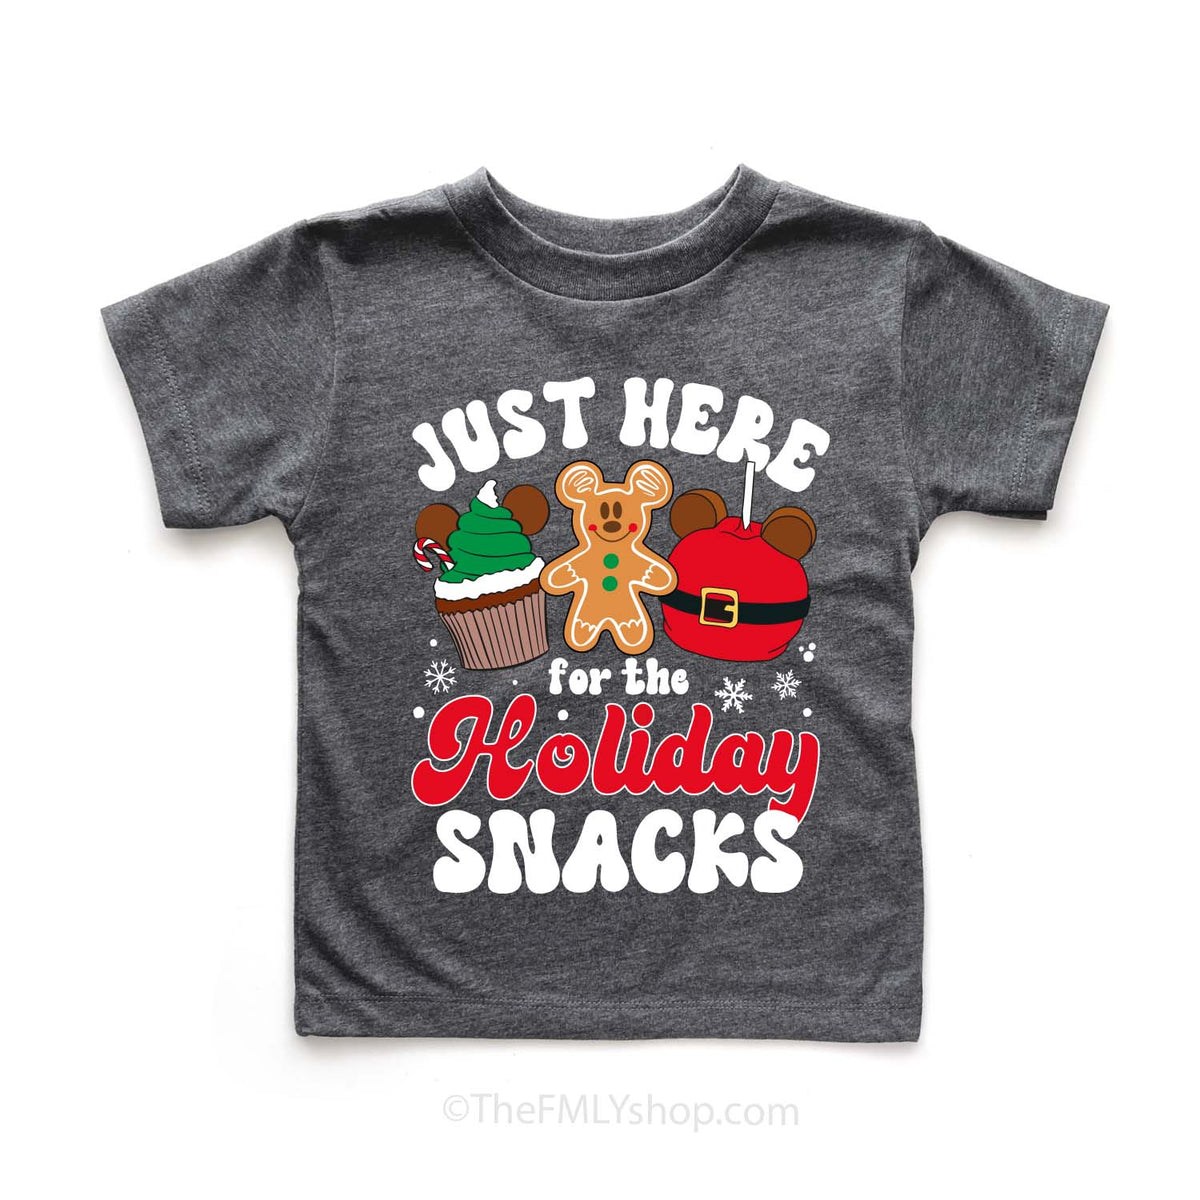 Just Here for the Holiday Snacks Tee, Kids Size